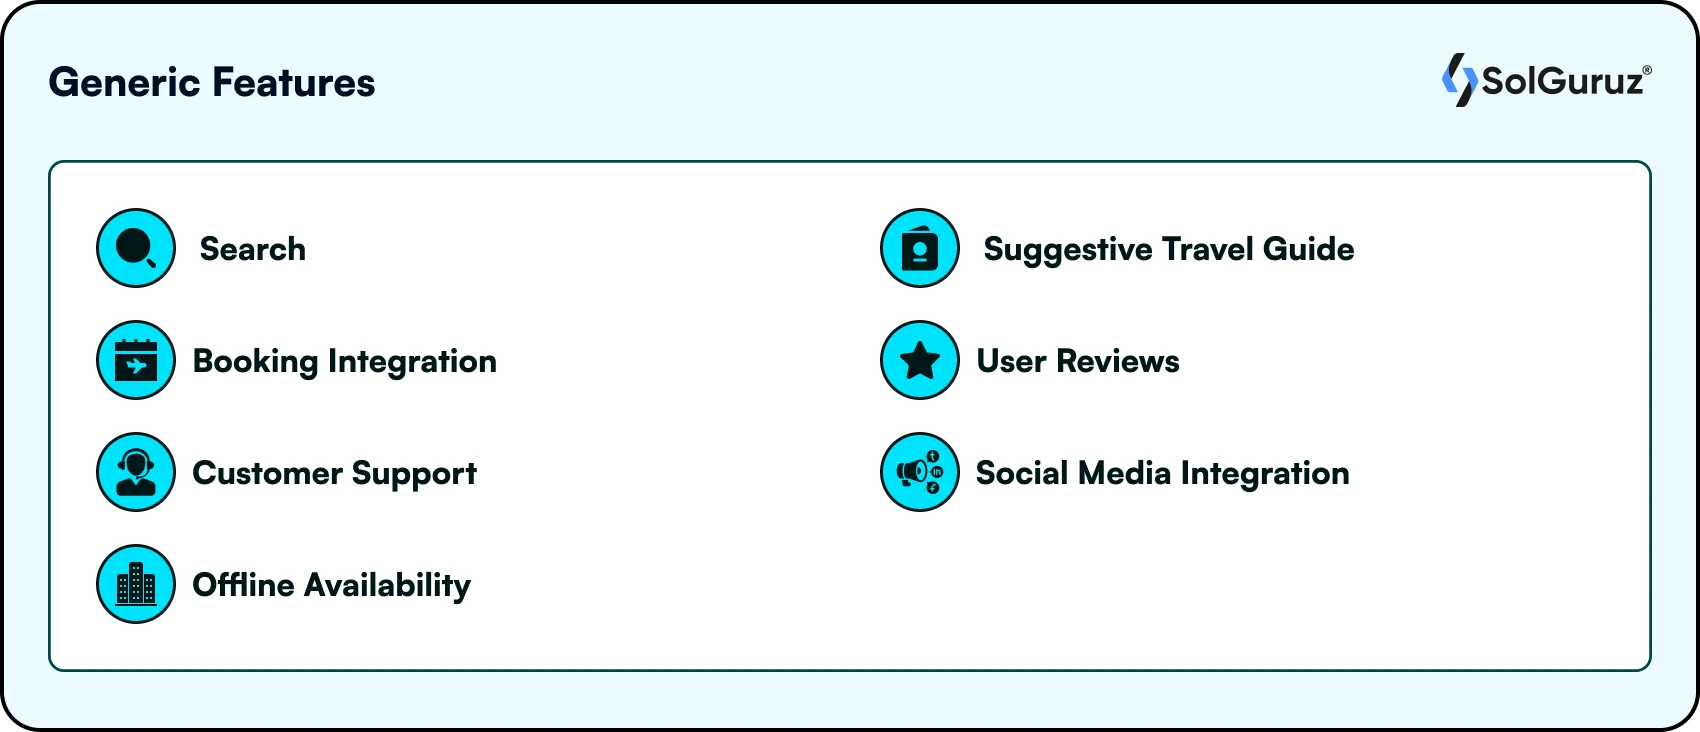 Generic Features of any Trip Planner App